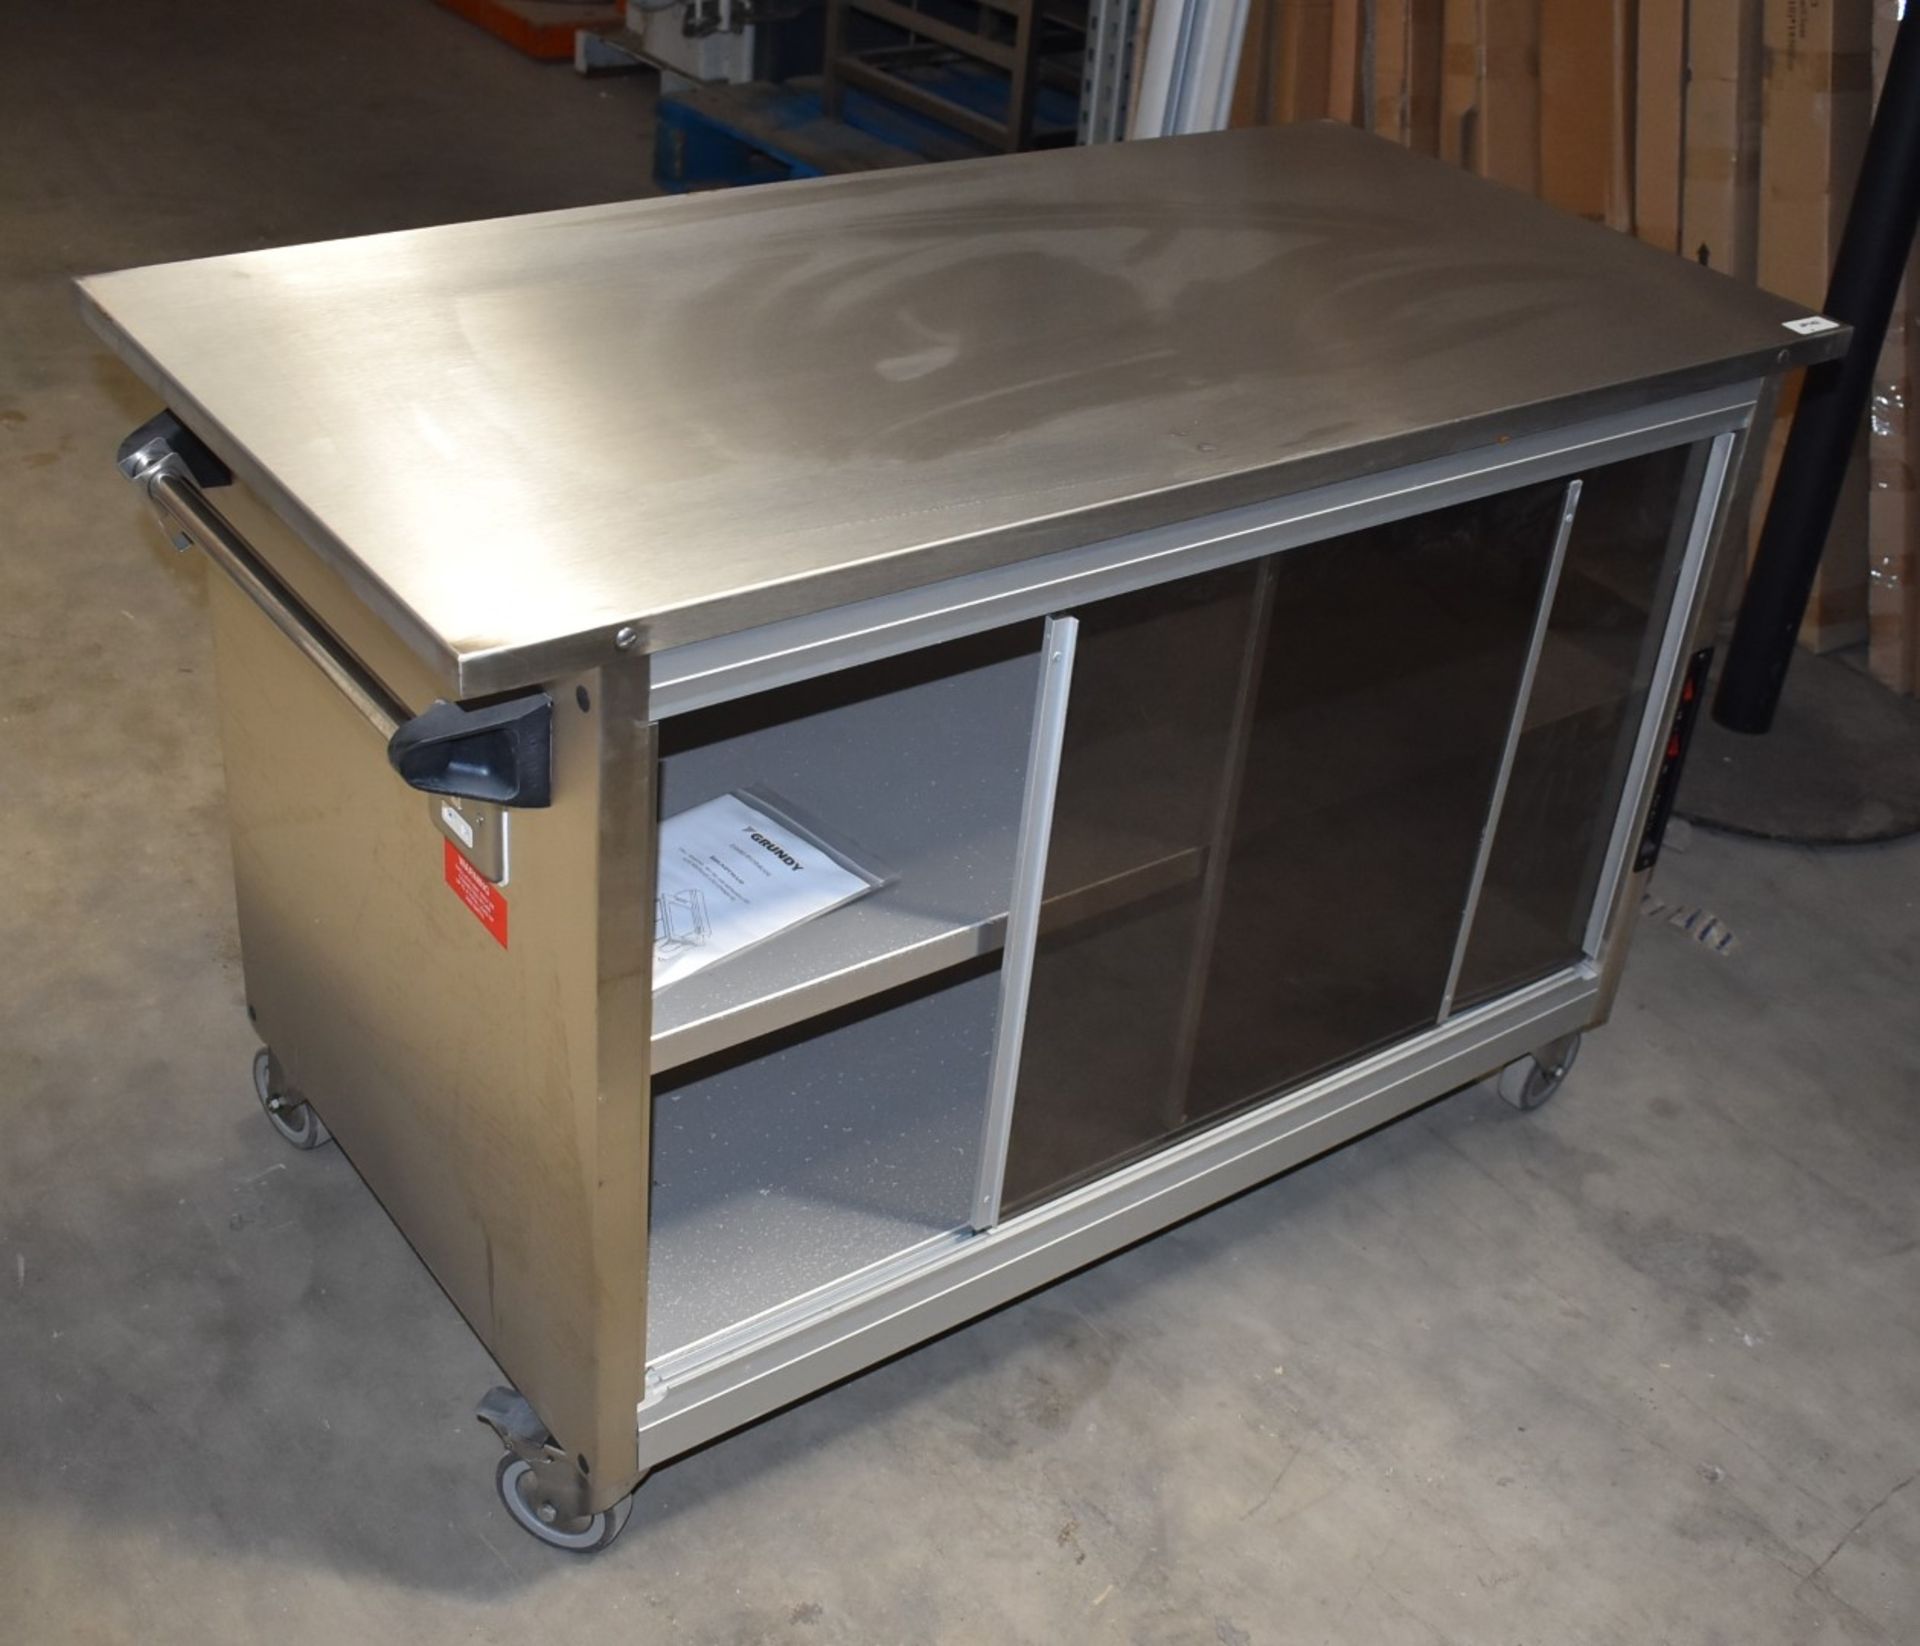 1 x Grundy Maid Mobile Food Warming Unit With Stainless Steel Top and Smoked Glass Doors - Ref JP142 - Image 12 of 16